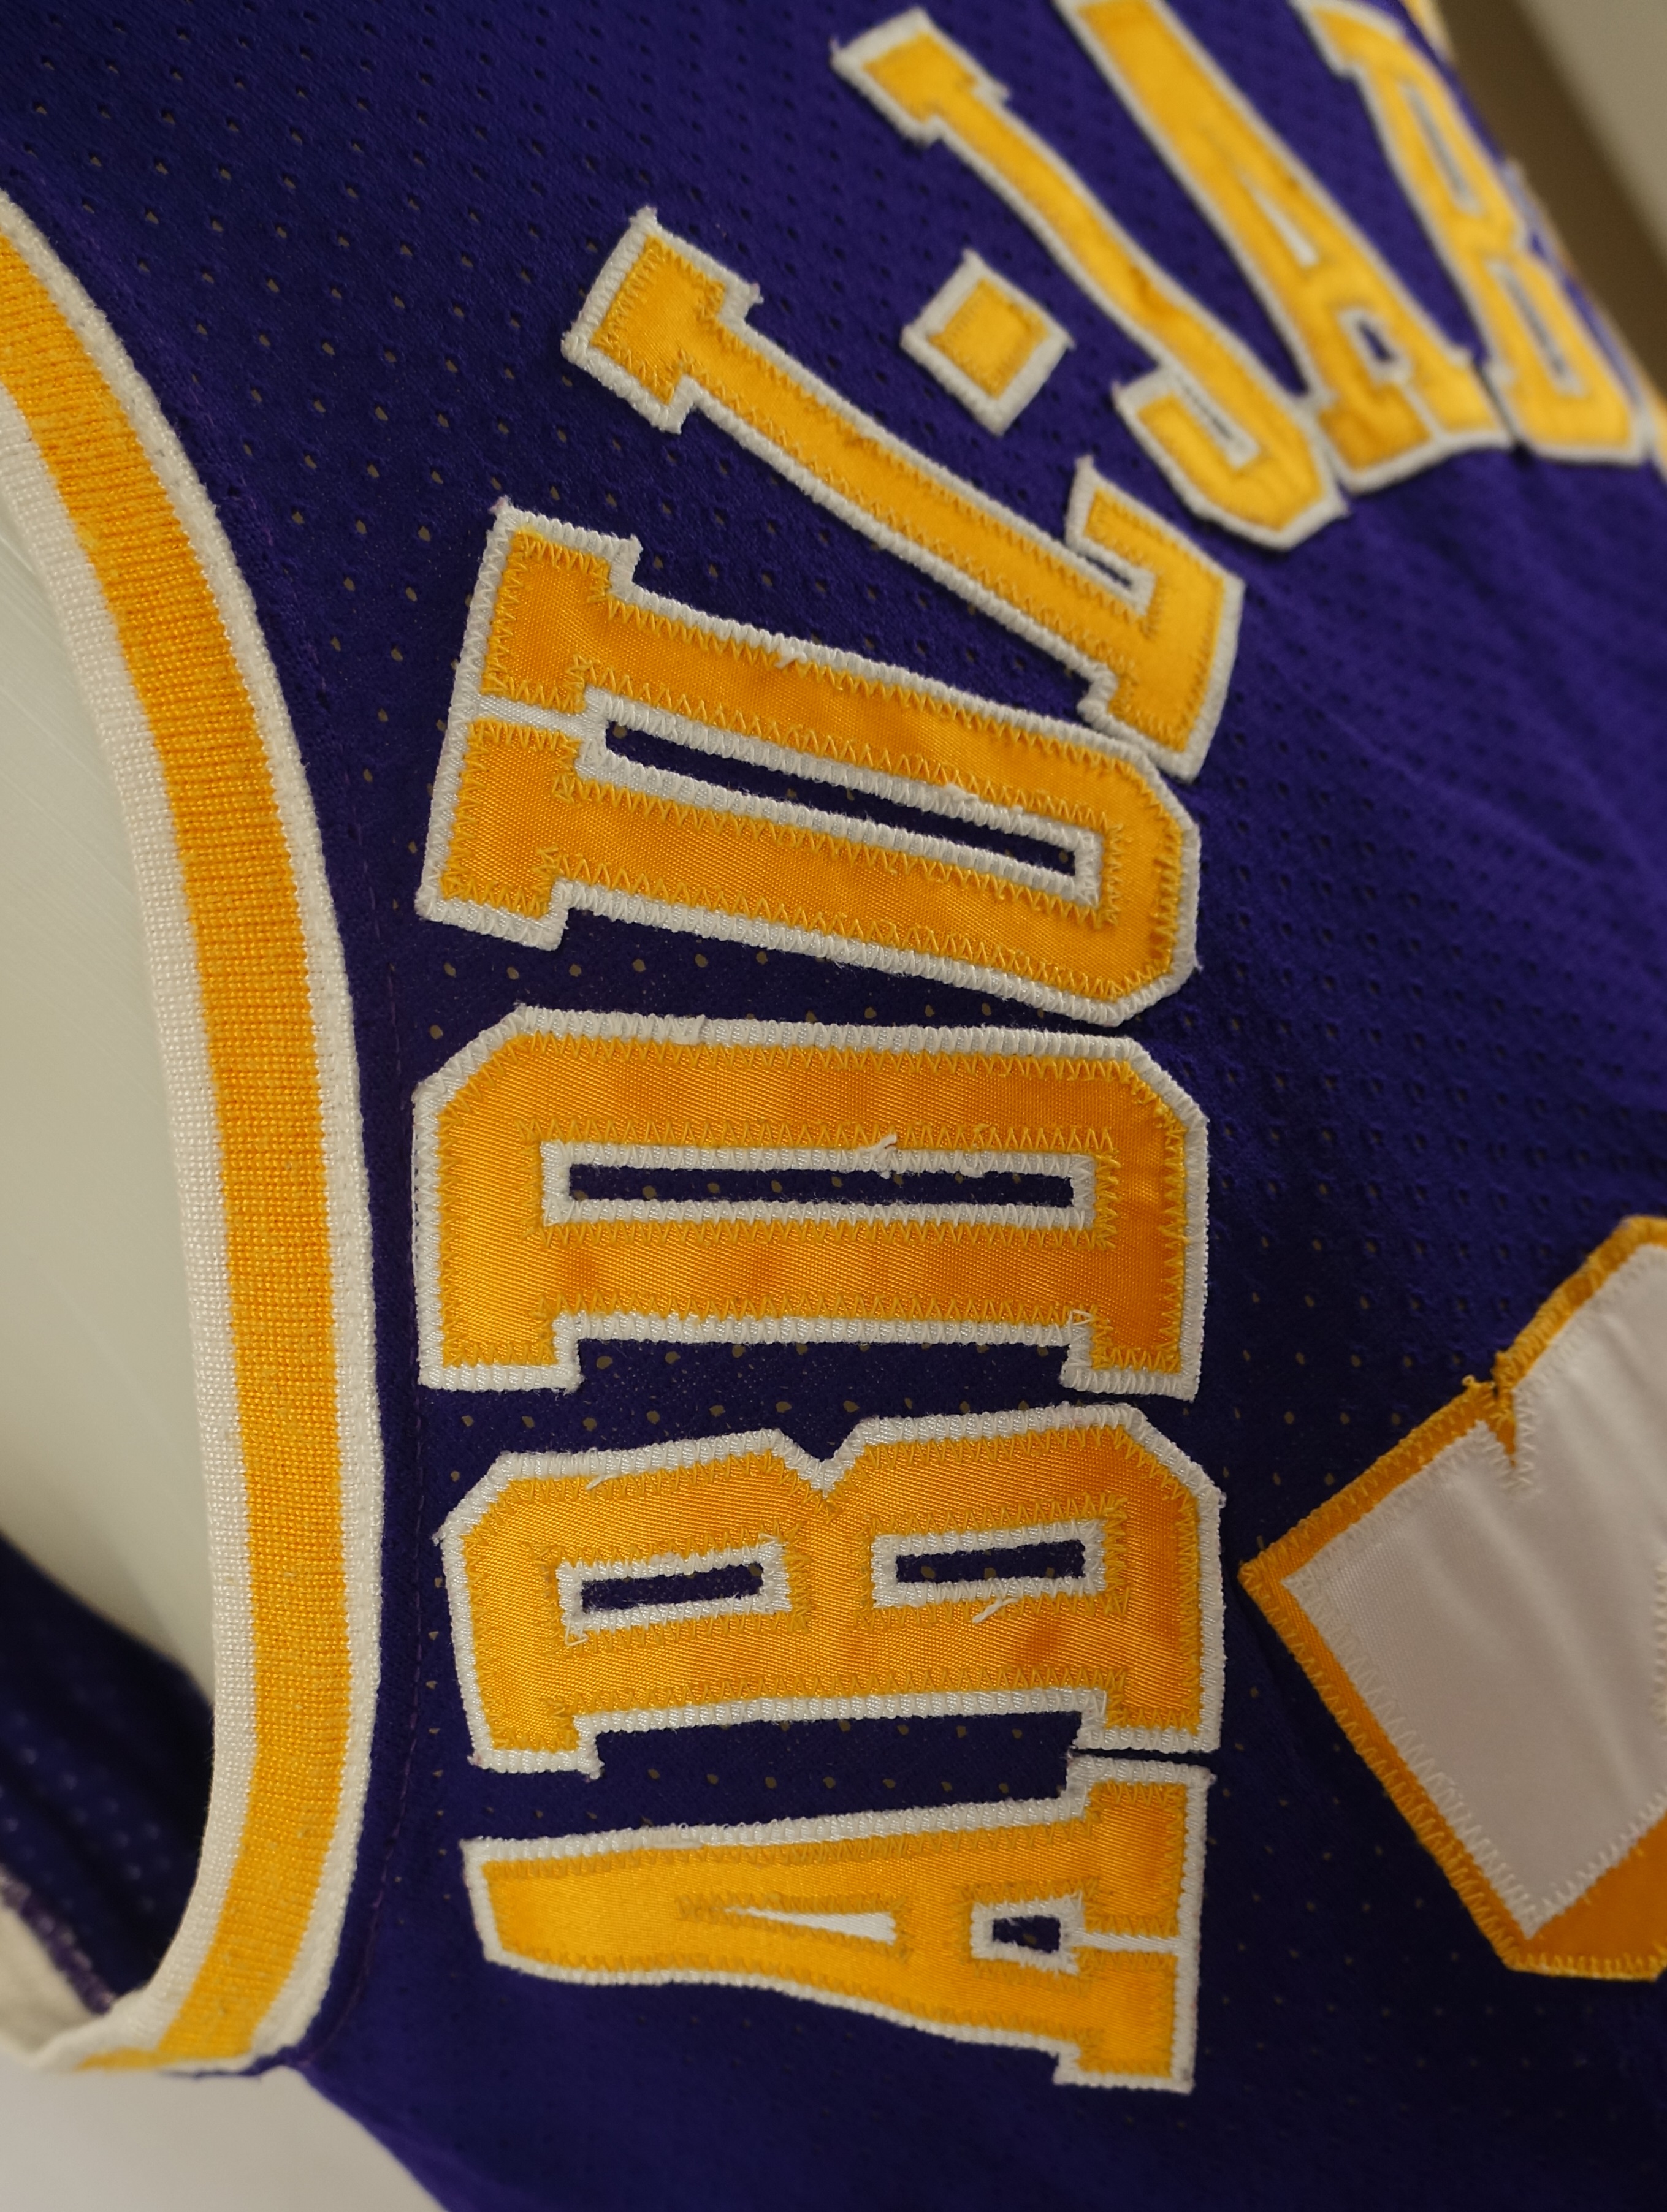 1975-89 Los Angeles Lakers Abdul-Jabbar 33 Home Jersey